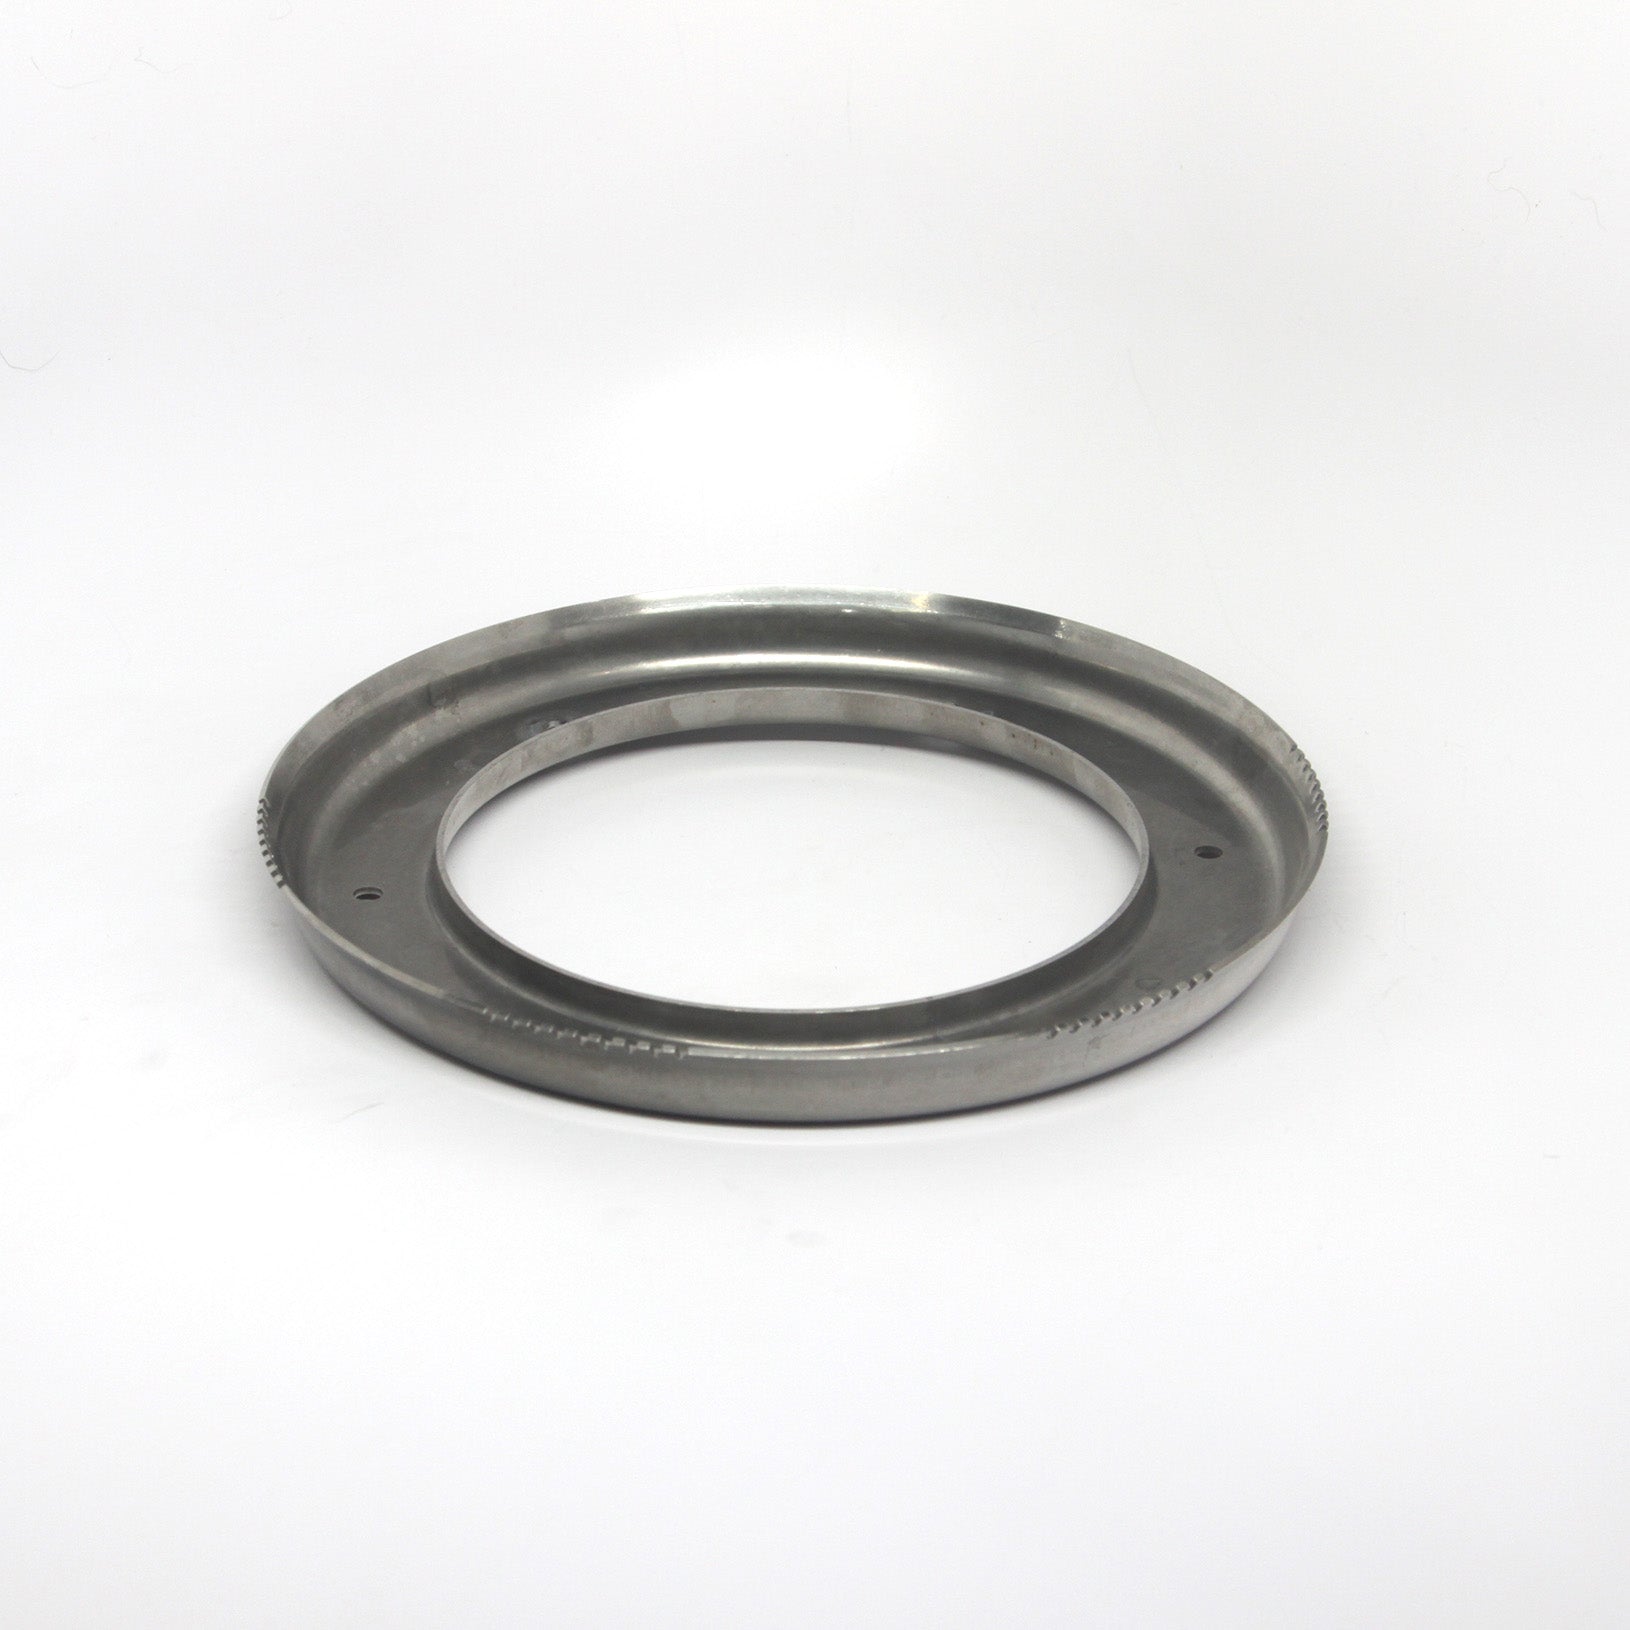 P425580 - Stainless Sprayring for 4-User Sansipray Collective Wash Fountain Intersan/AquaDesign